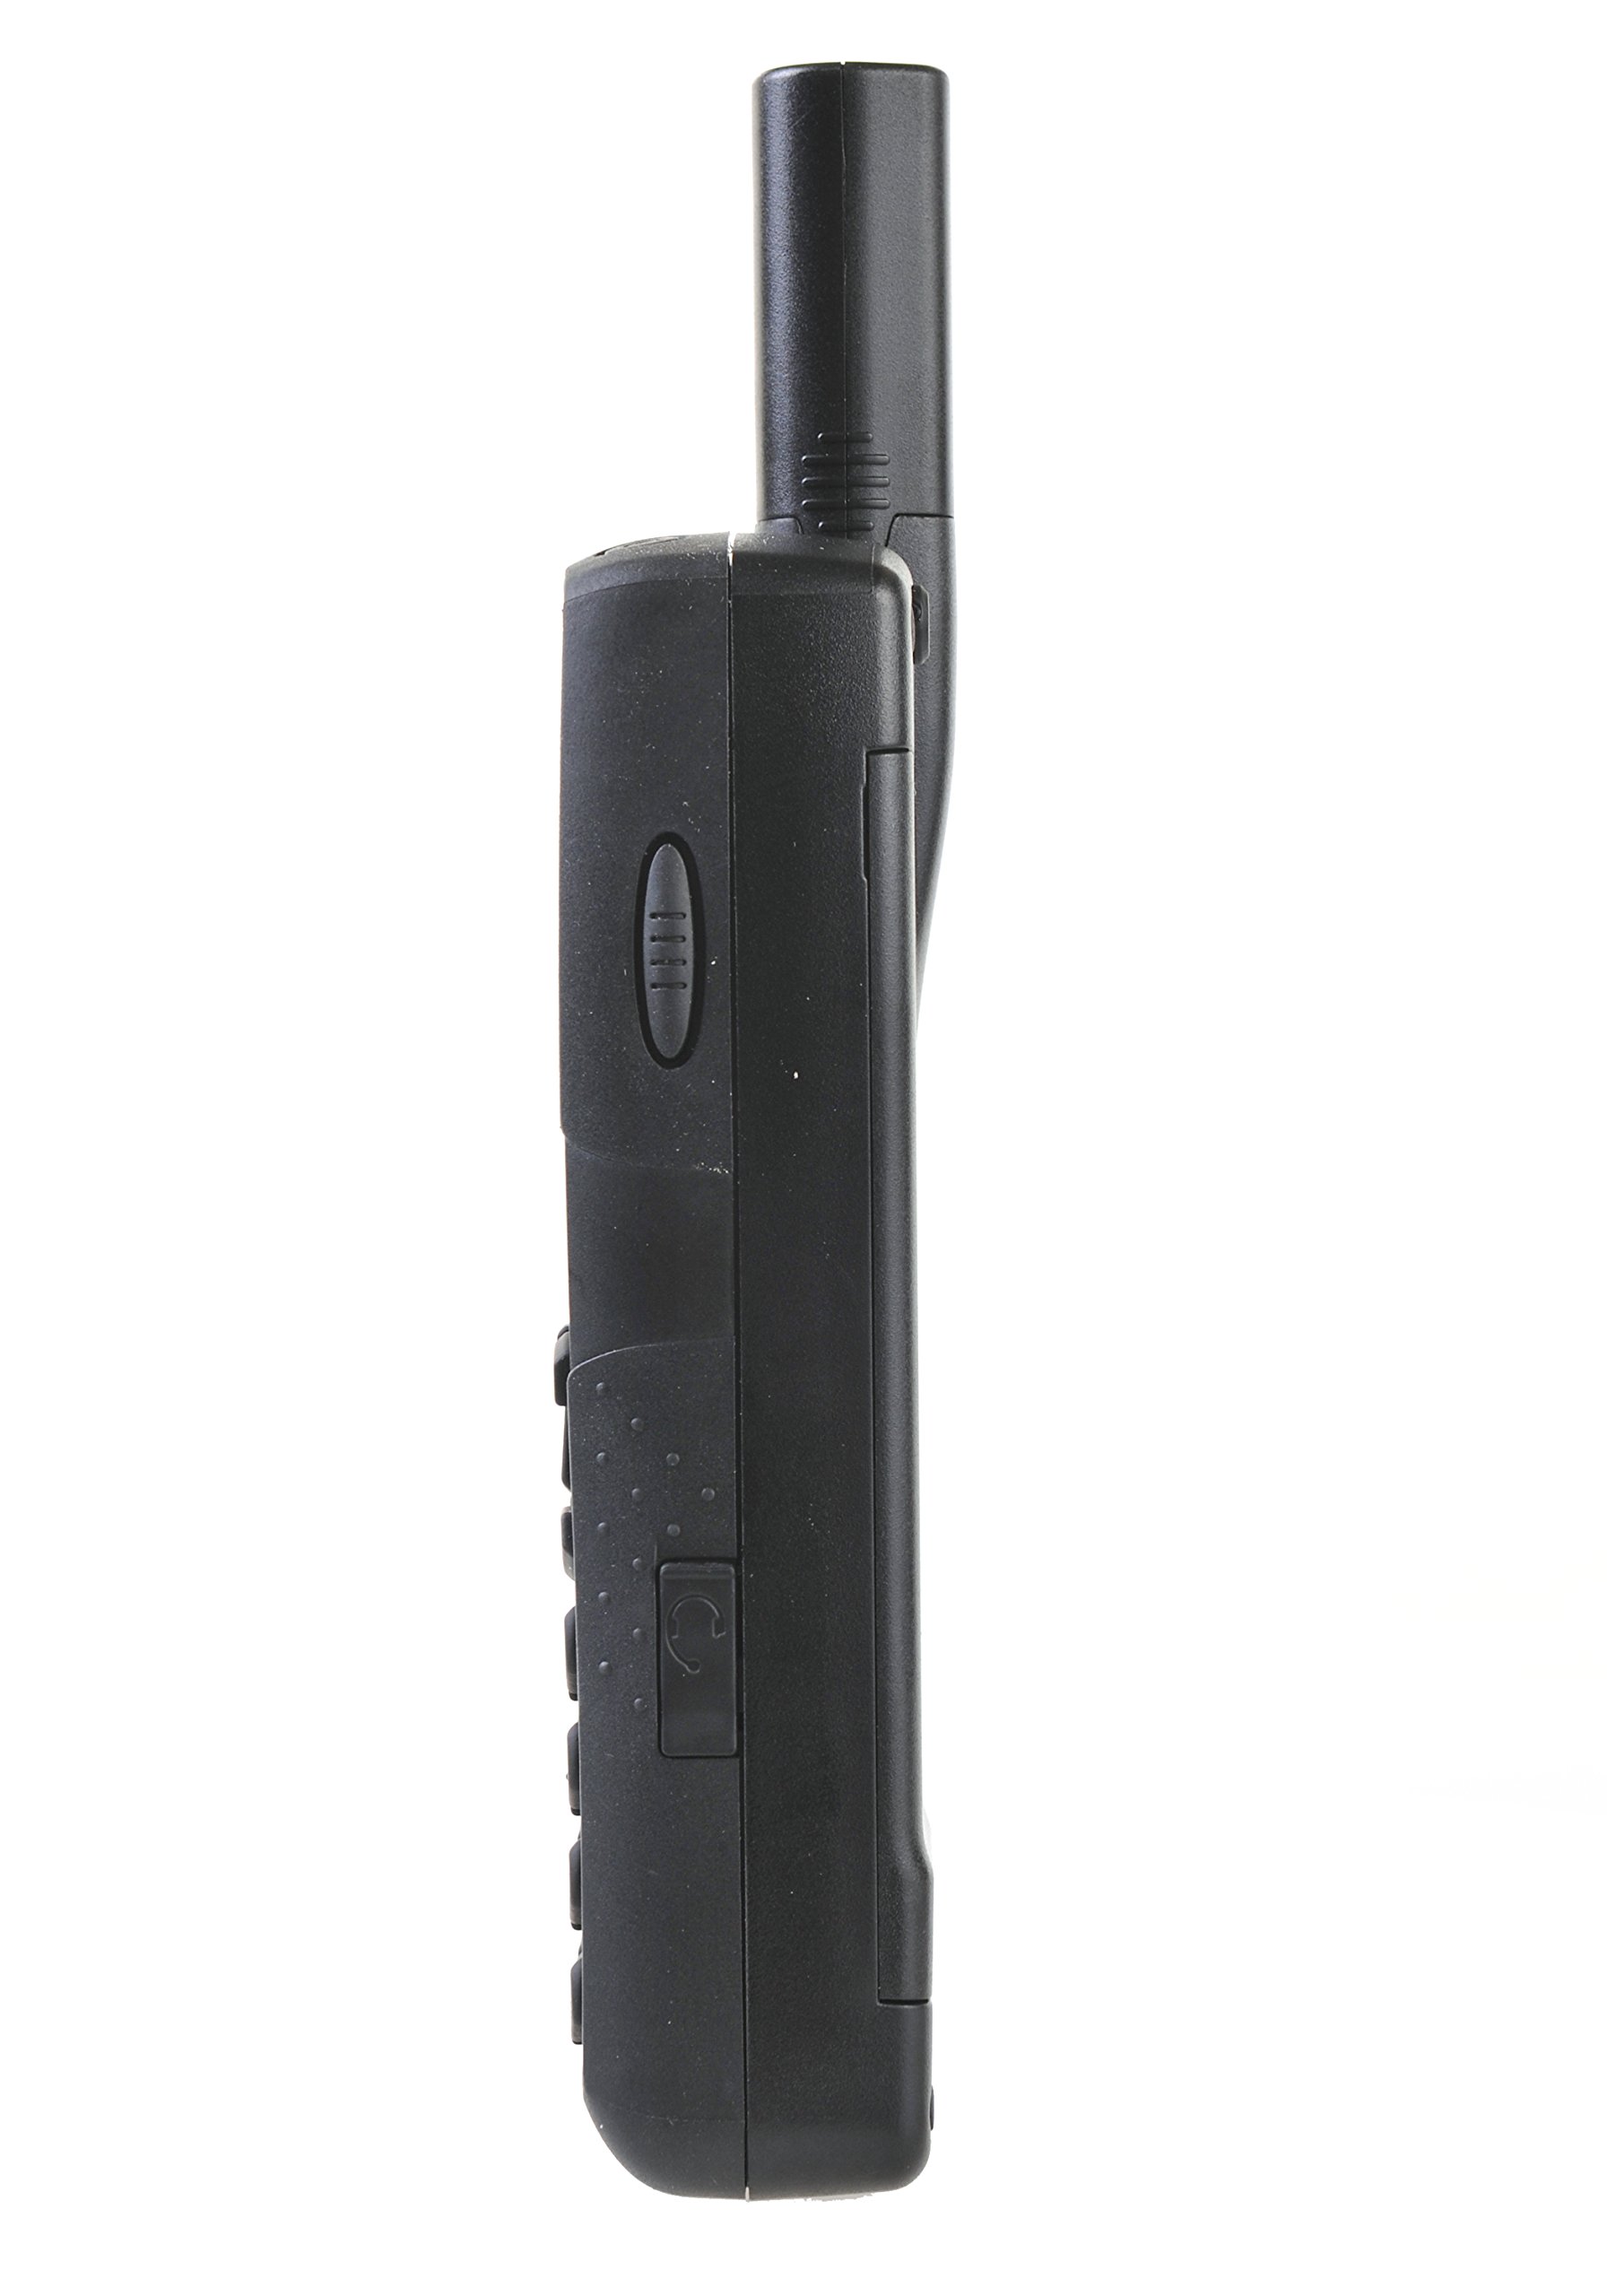 Iridium 9555 Satellite Phone with a Prepaid SIM Card Ready to Activate (No Airtime Included)